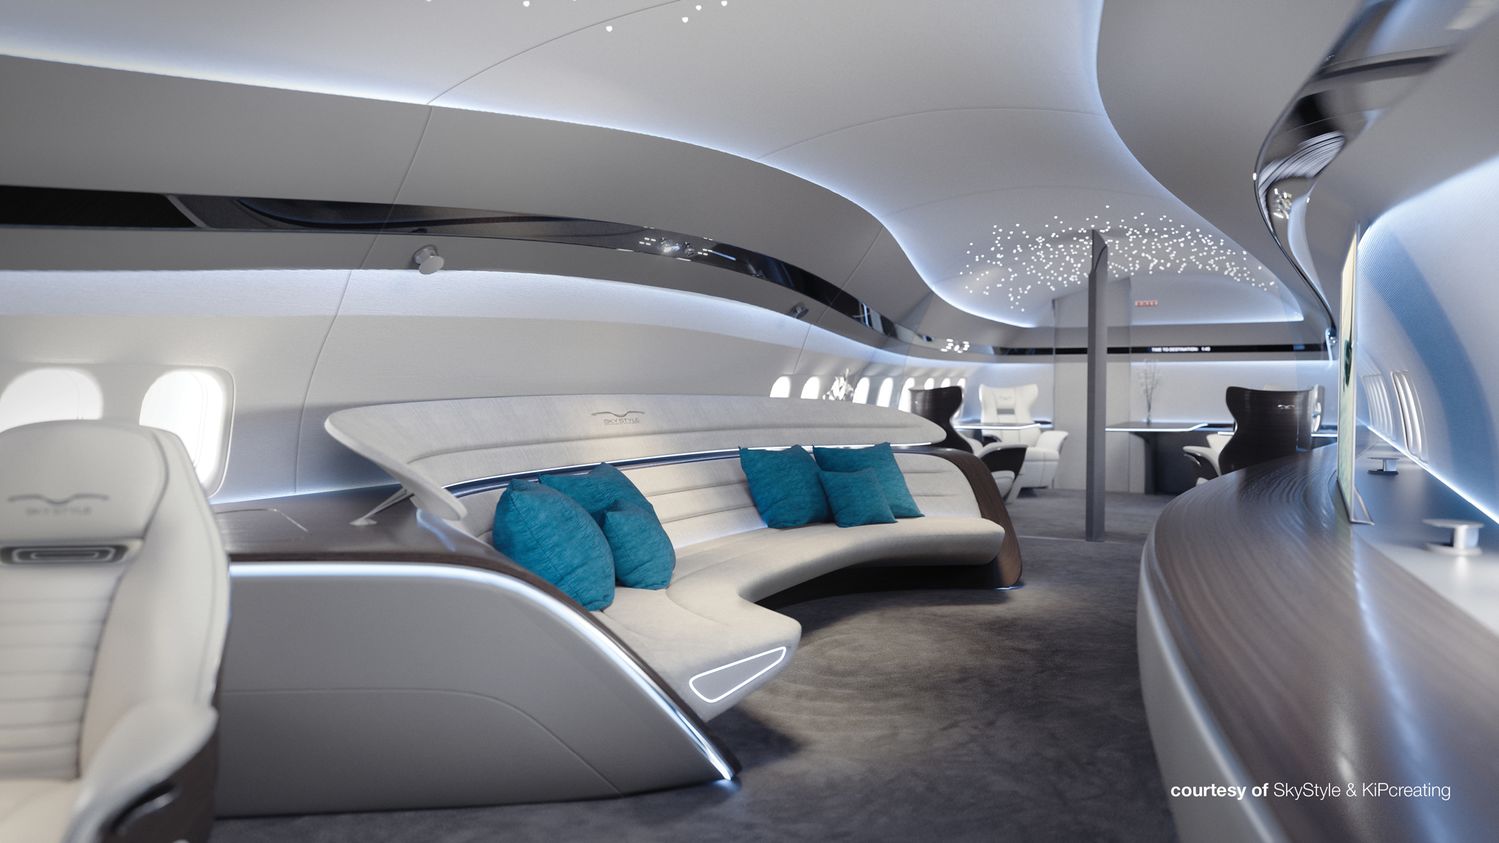 That extra space also unlocks amazing cabin concepts such as the new Genesis design.